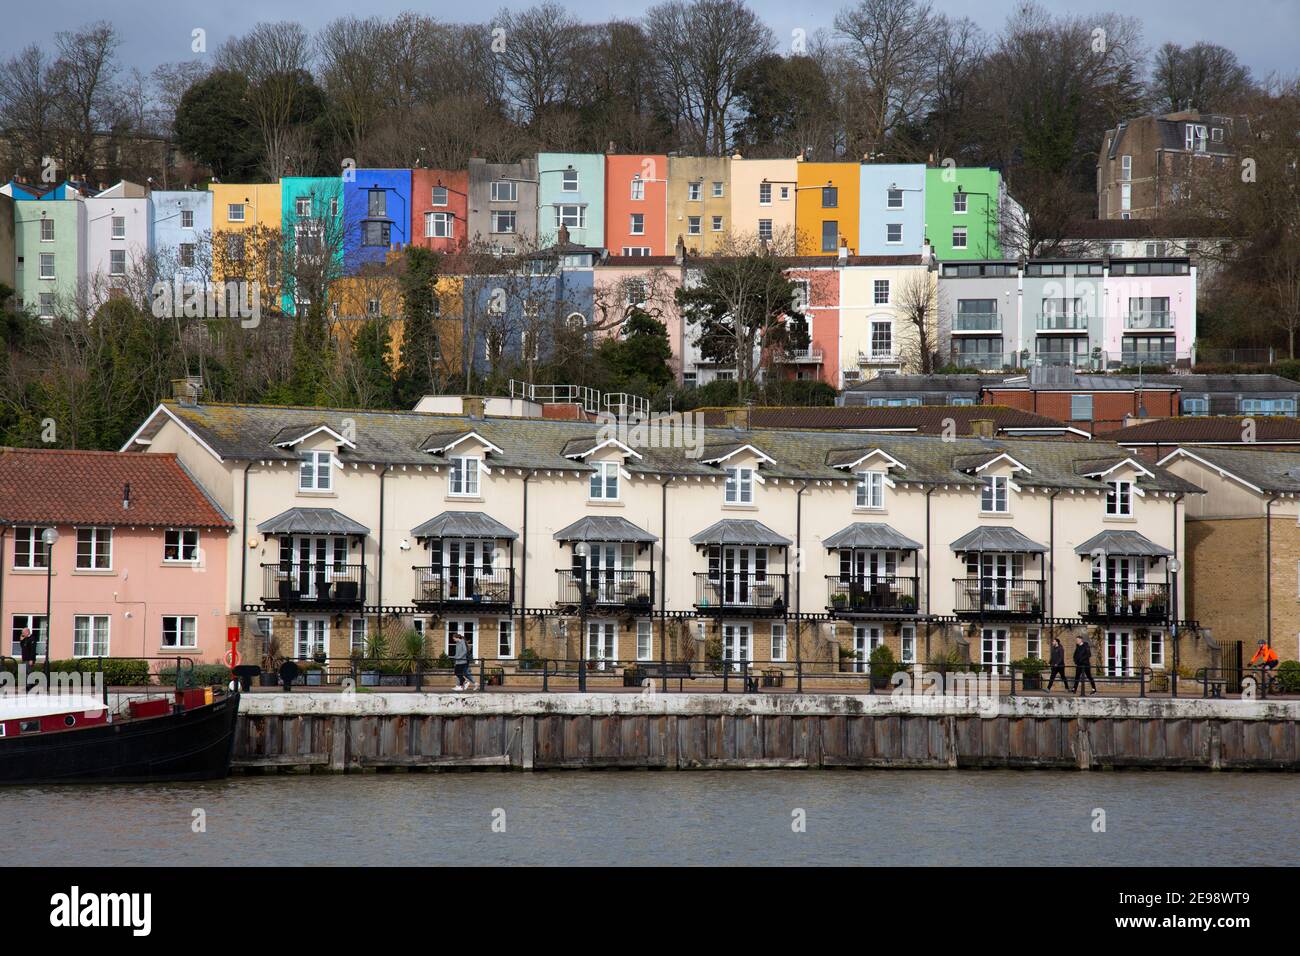 View looking across the River Avon in Bristol, England, towards modern riverside apartments, and colourful older terraced houses behind. Stock Photo